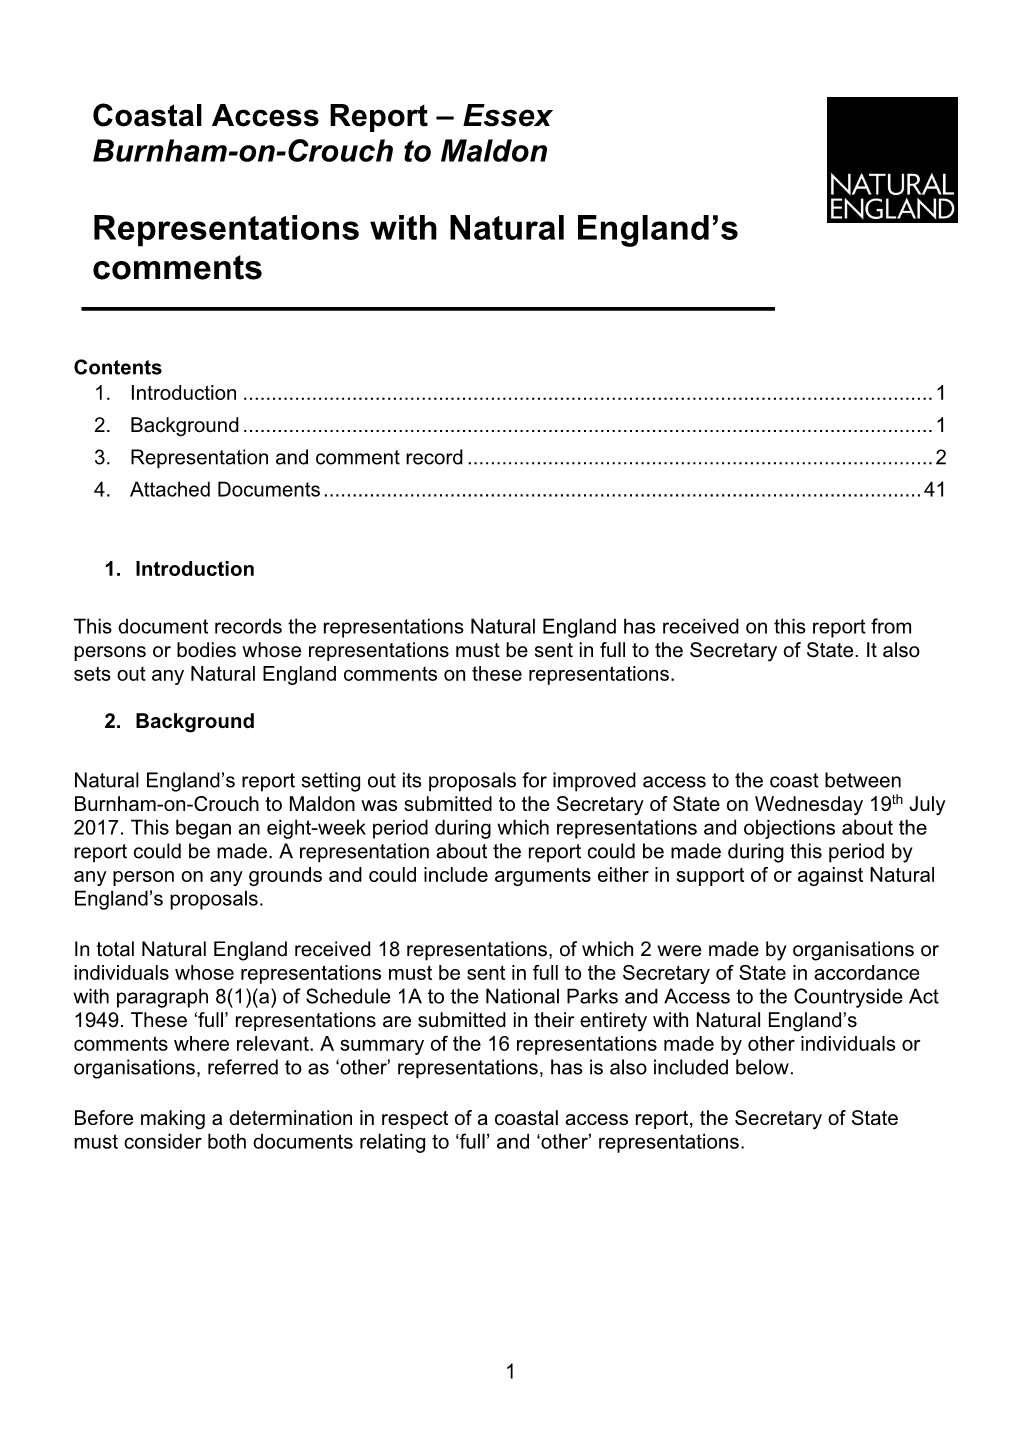 Essex: Representations with Natural England's Comments